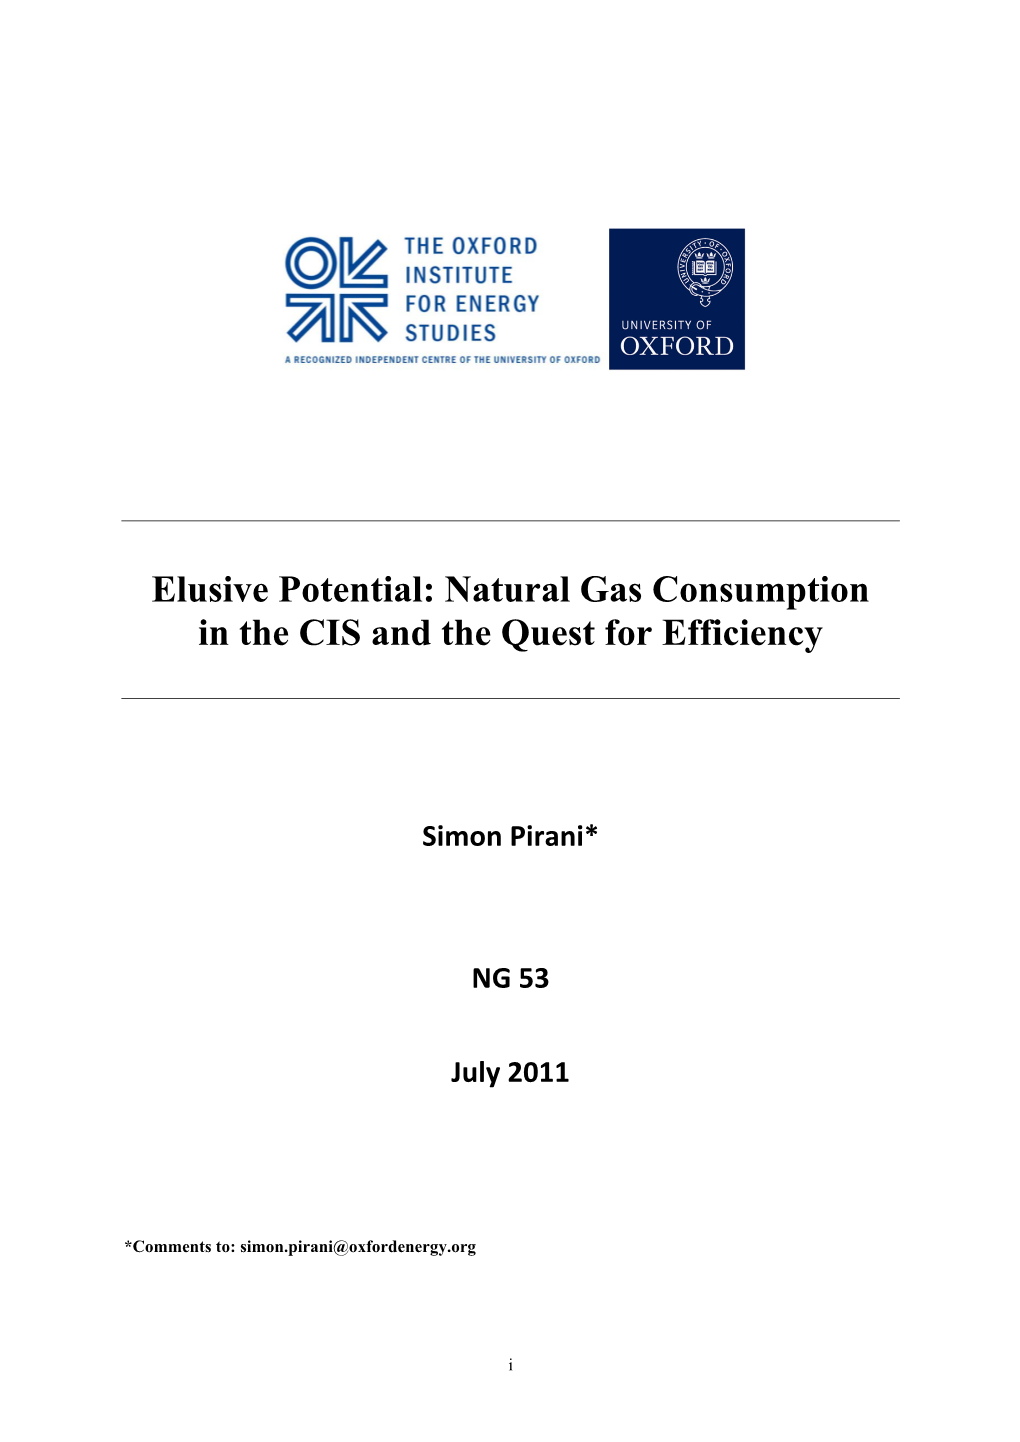 Natural Gas Consumption in the CIS and the Quest for Efficiency